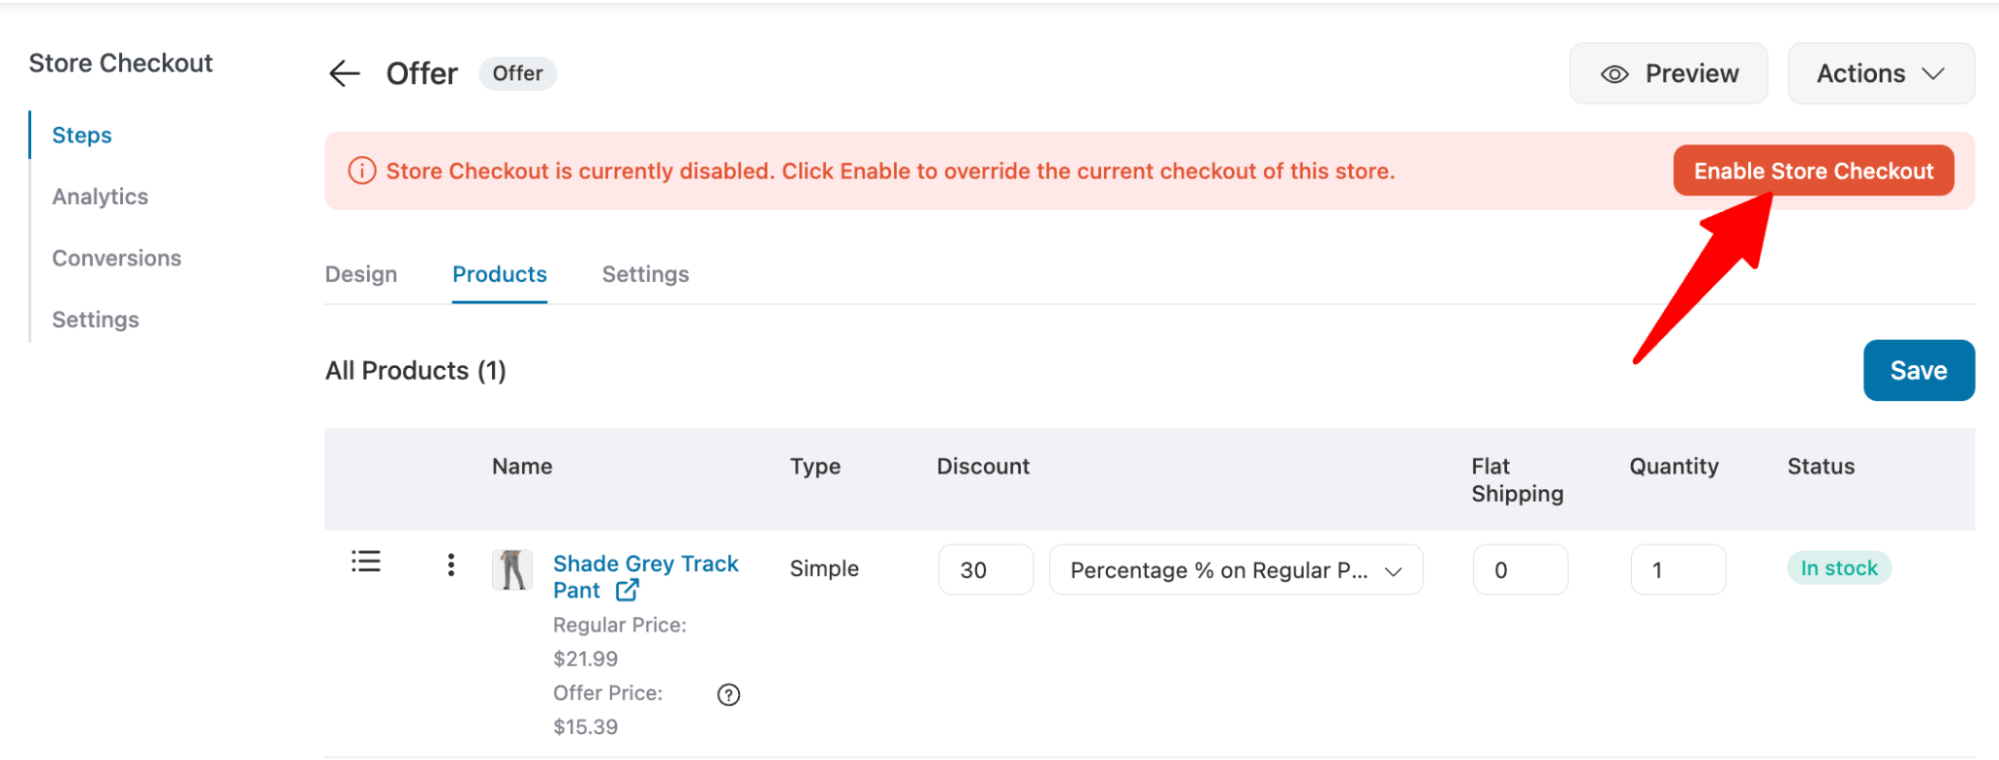 enable store checkout after adding upsell offer